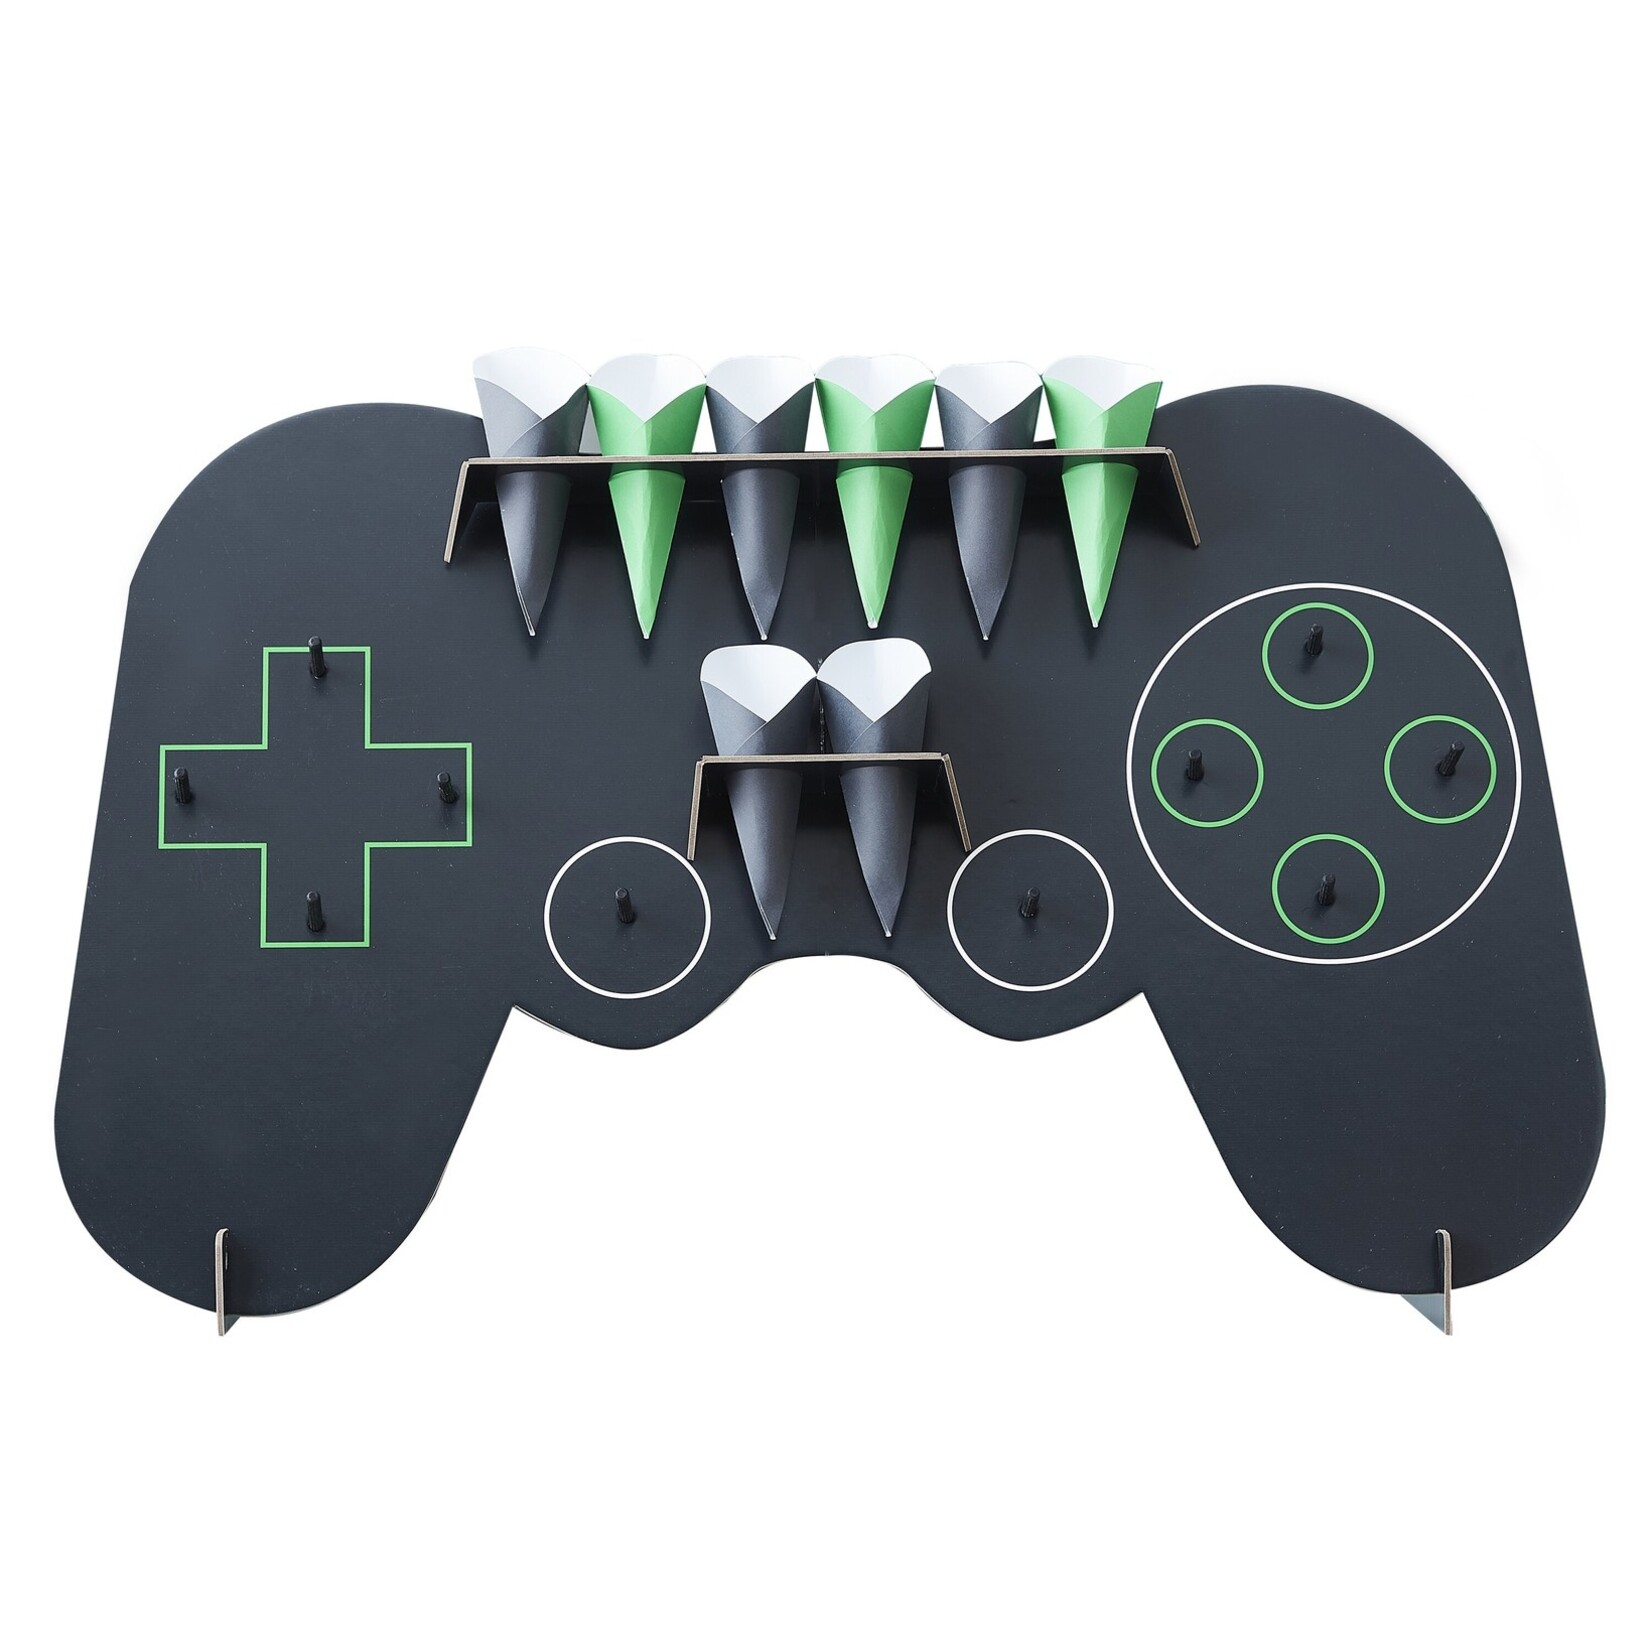 GINGERRAY controller shaped treat stand